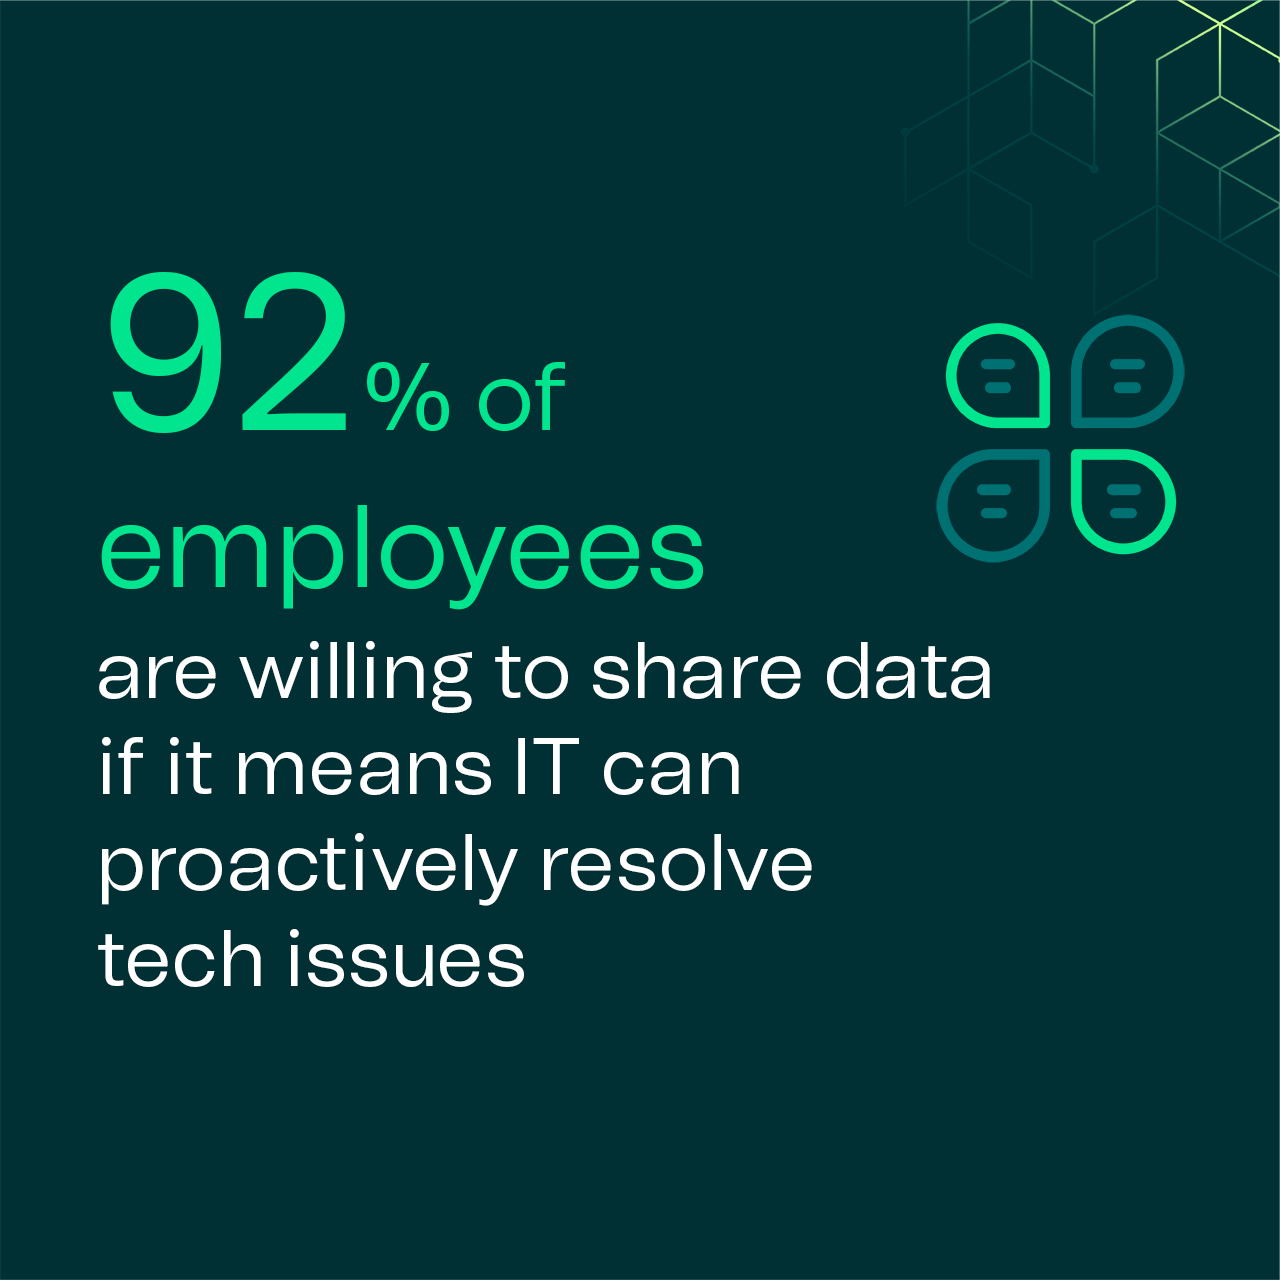 92% of employees are willing to share data if it means IT can proactively resolve tech issues